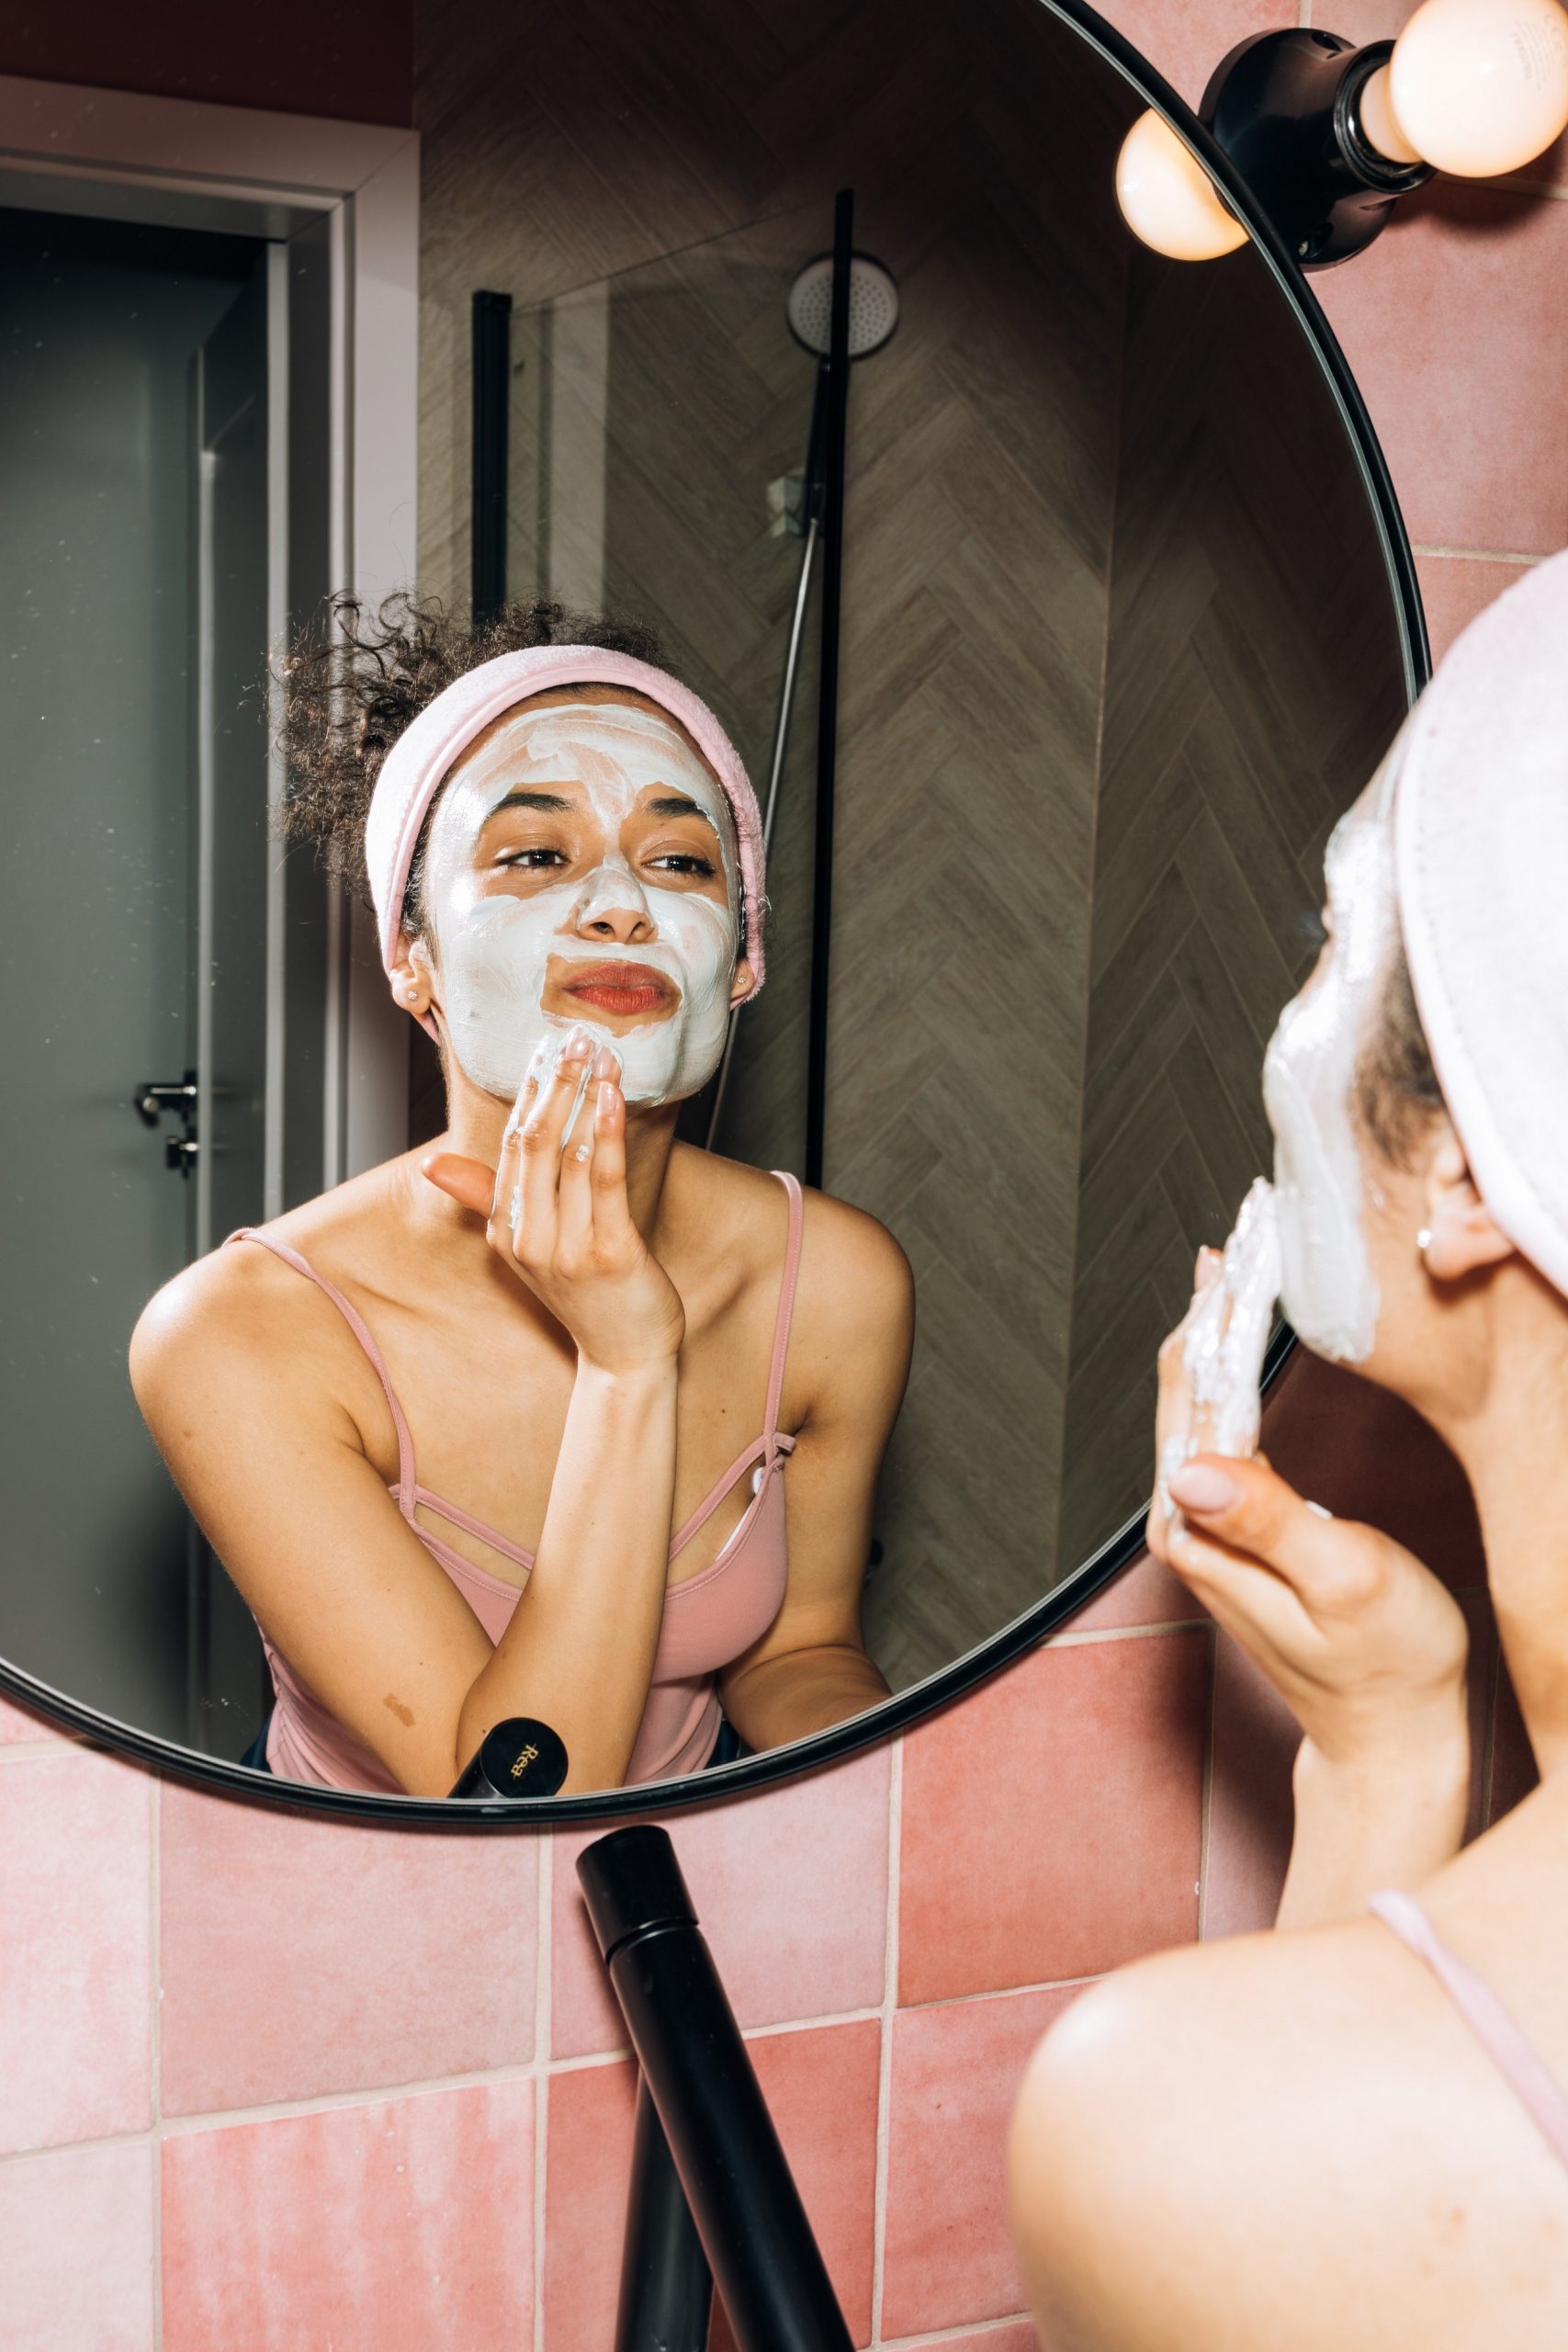 4 Ways to Better Care for Your Skin